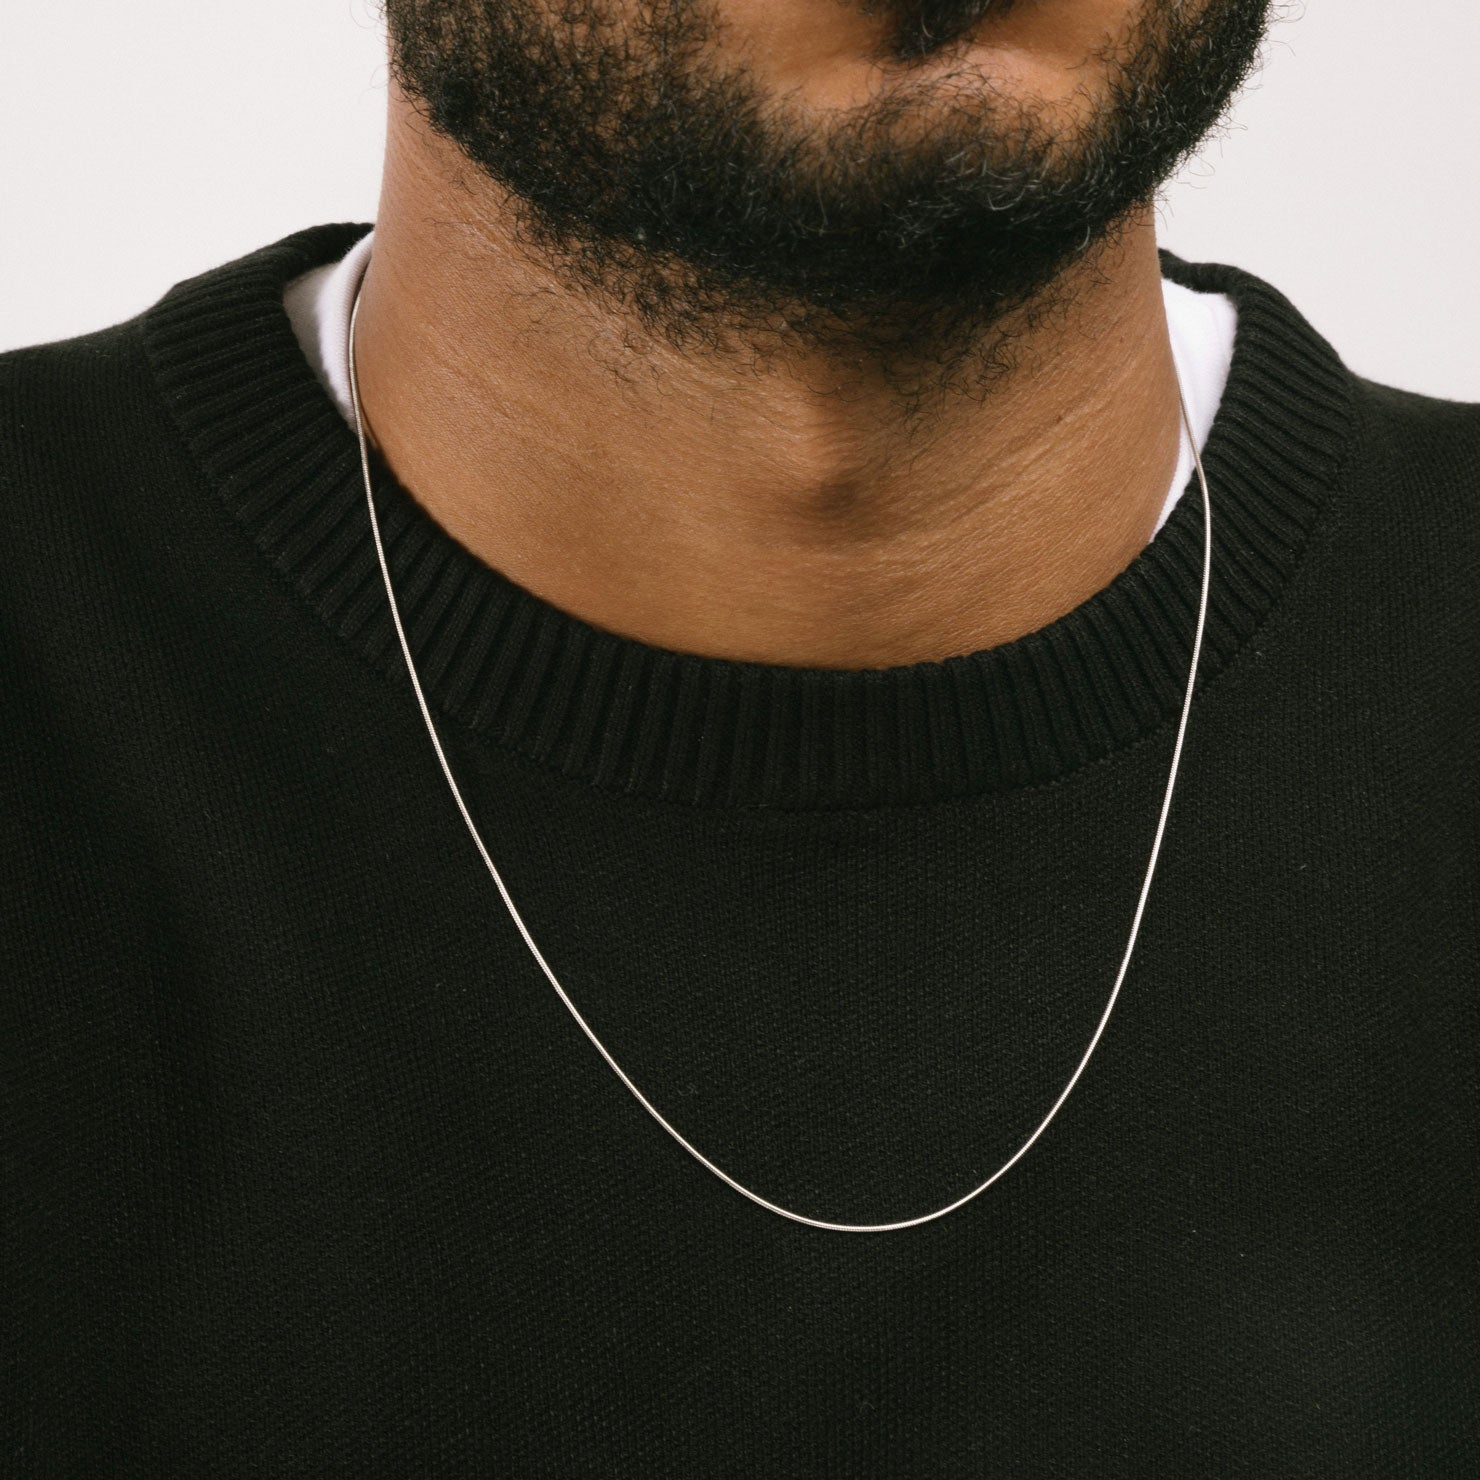 A model wearing the 1mm Snake Chain is made of durable stainless steel, measuring 22 inches in length. It's also non-tarnish and water-resistant for extra protection.